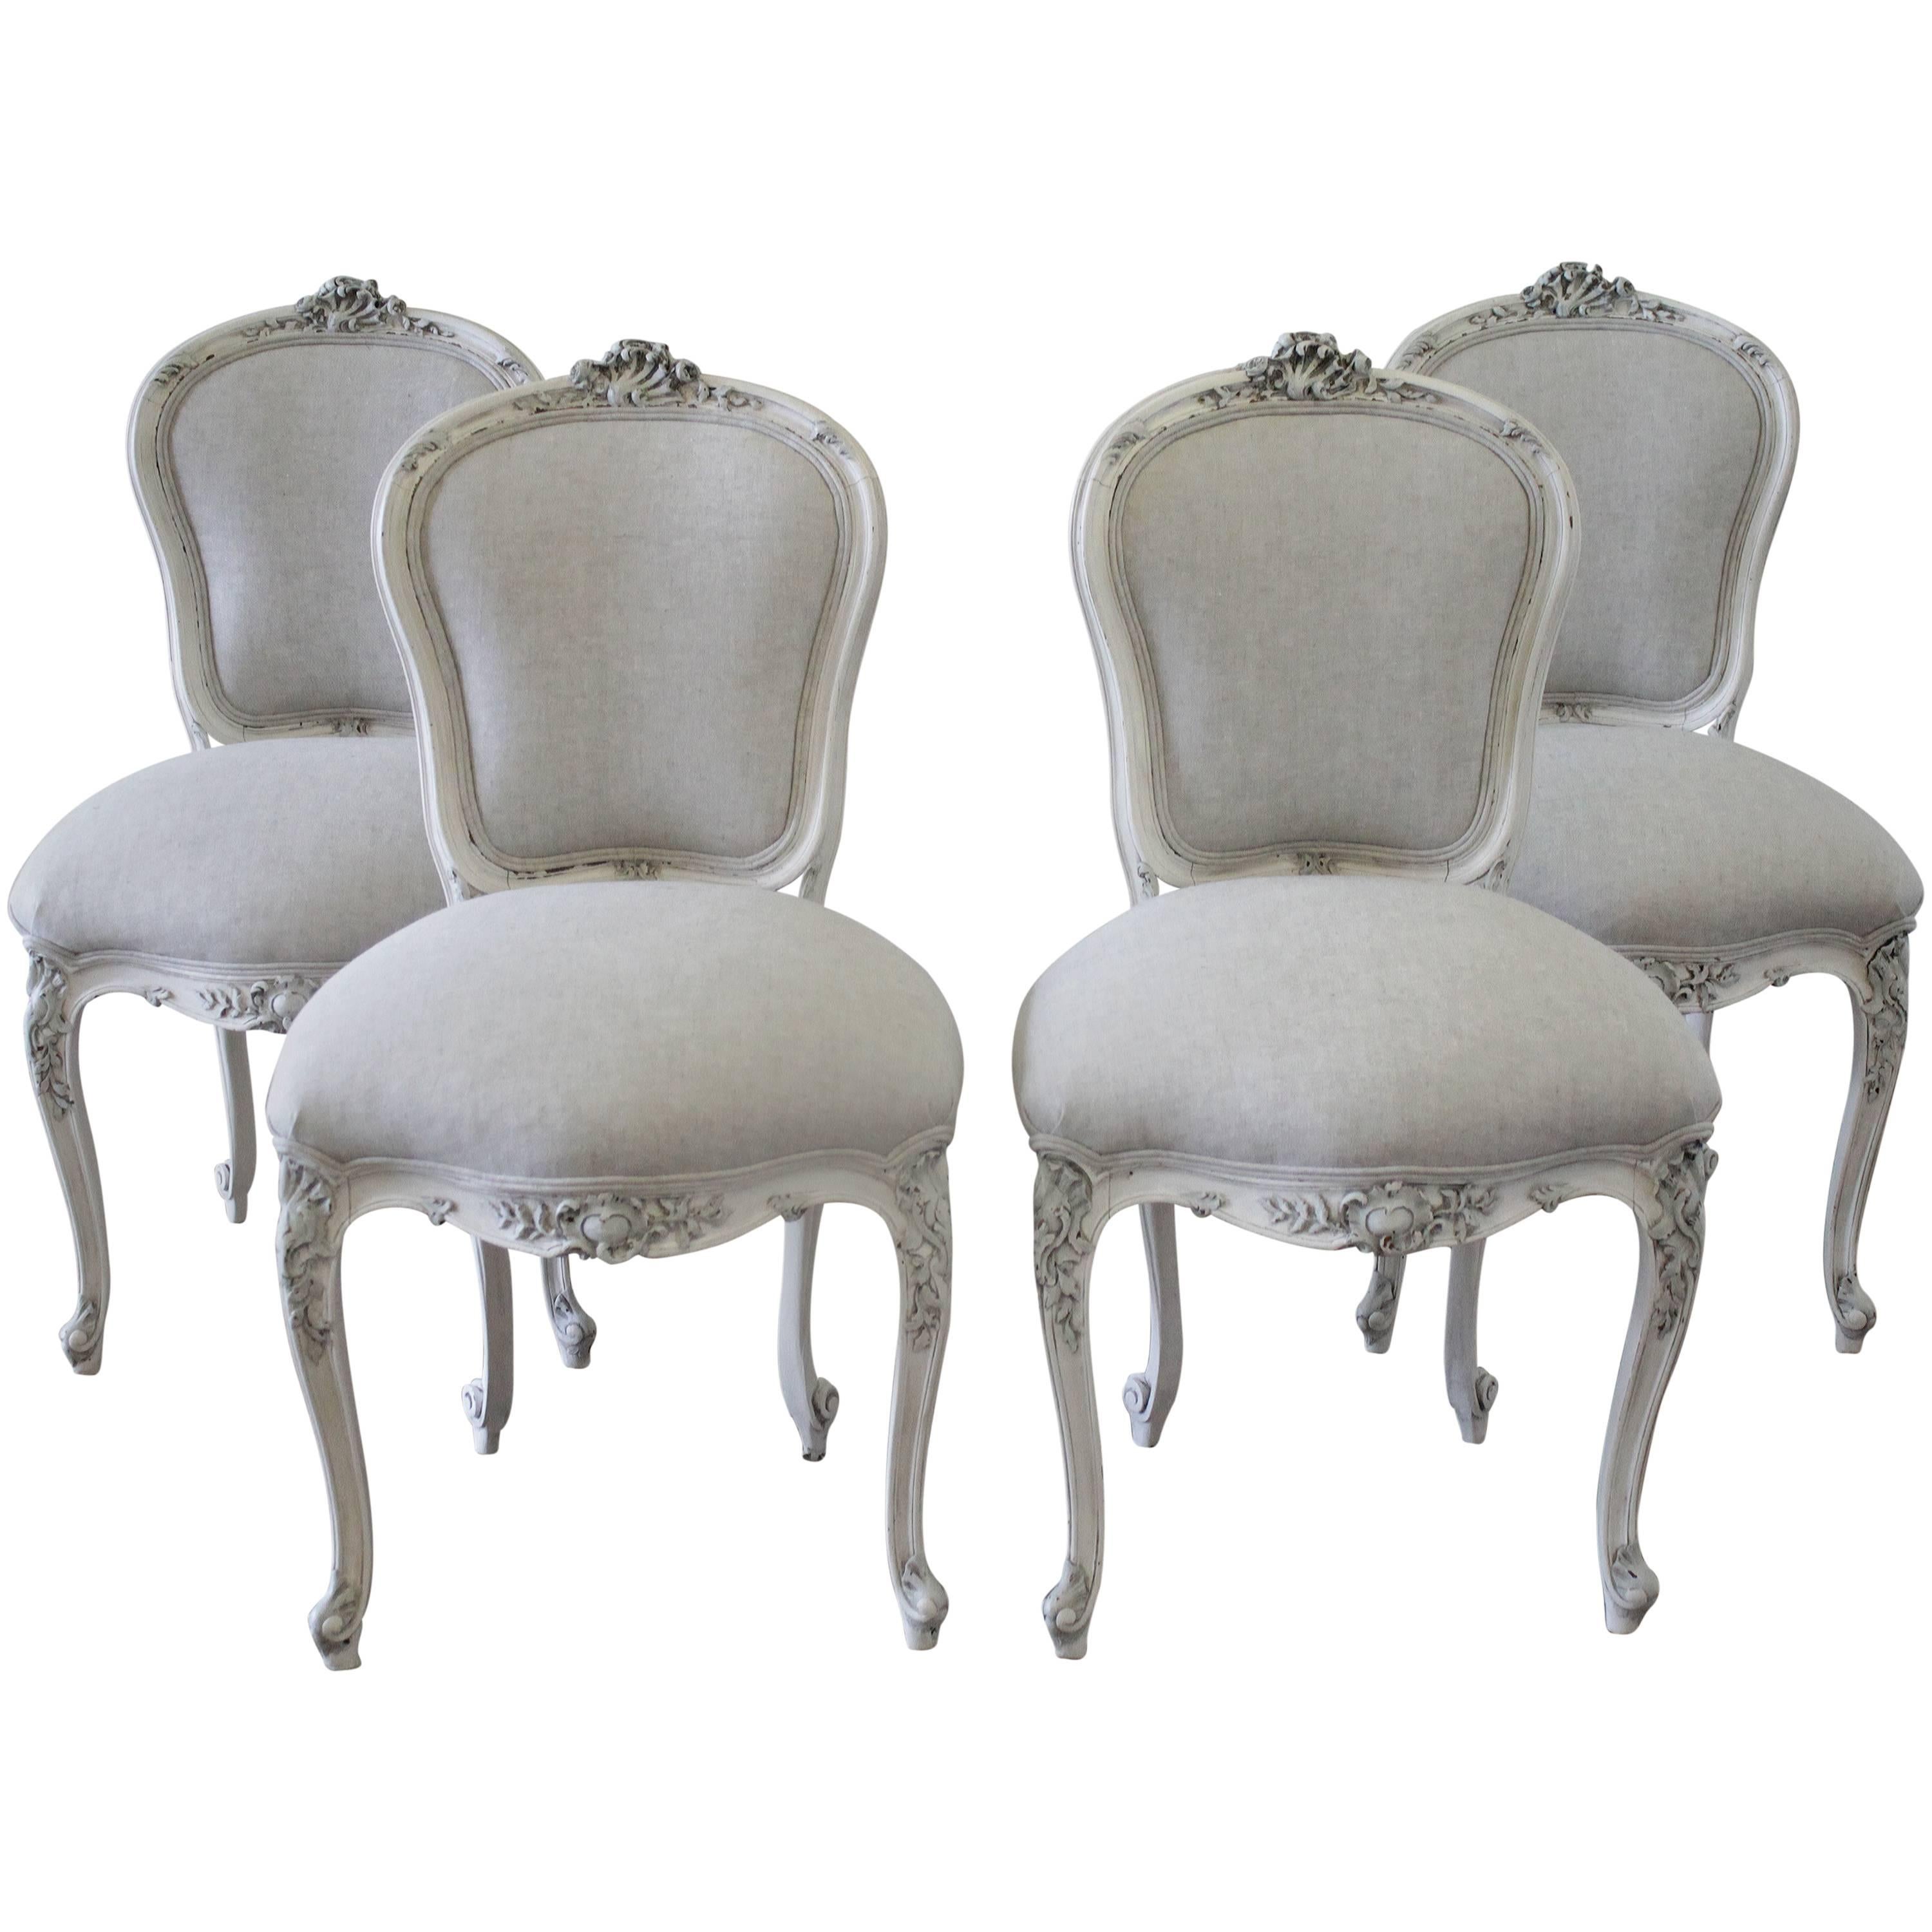 Set of Four Antique French Rococo Painted Dining Chairs